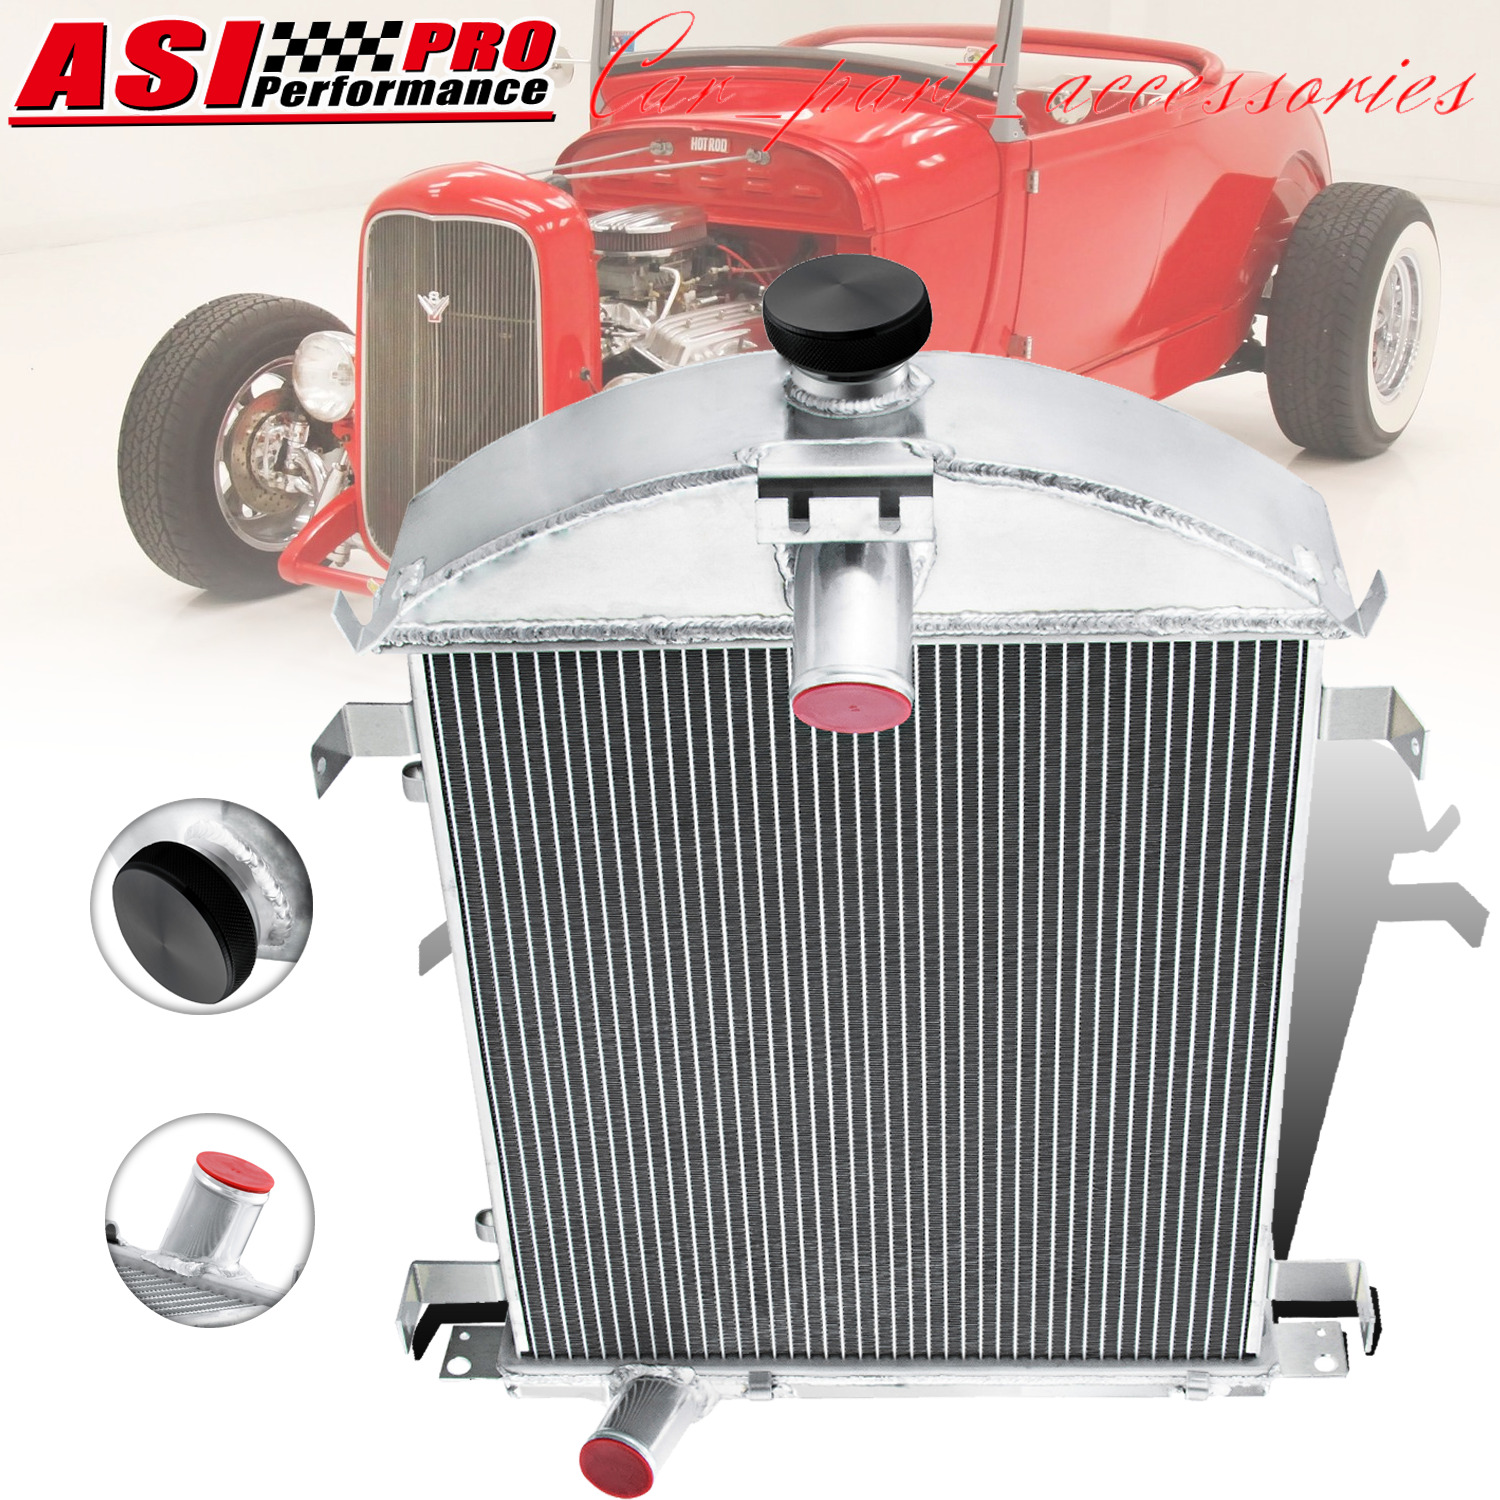 ASI 4 Rows Aluminum Radiator Cooler Fits 1928-1929 Ford Model A Heavy Duty 3.3L